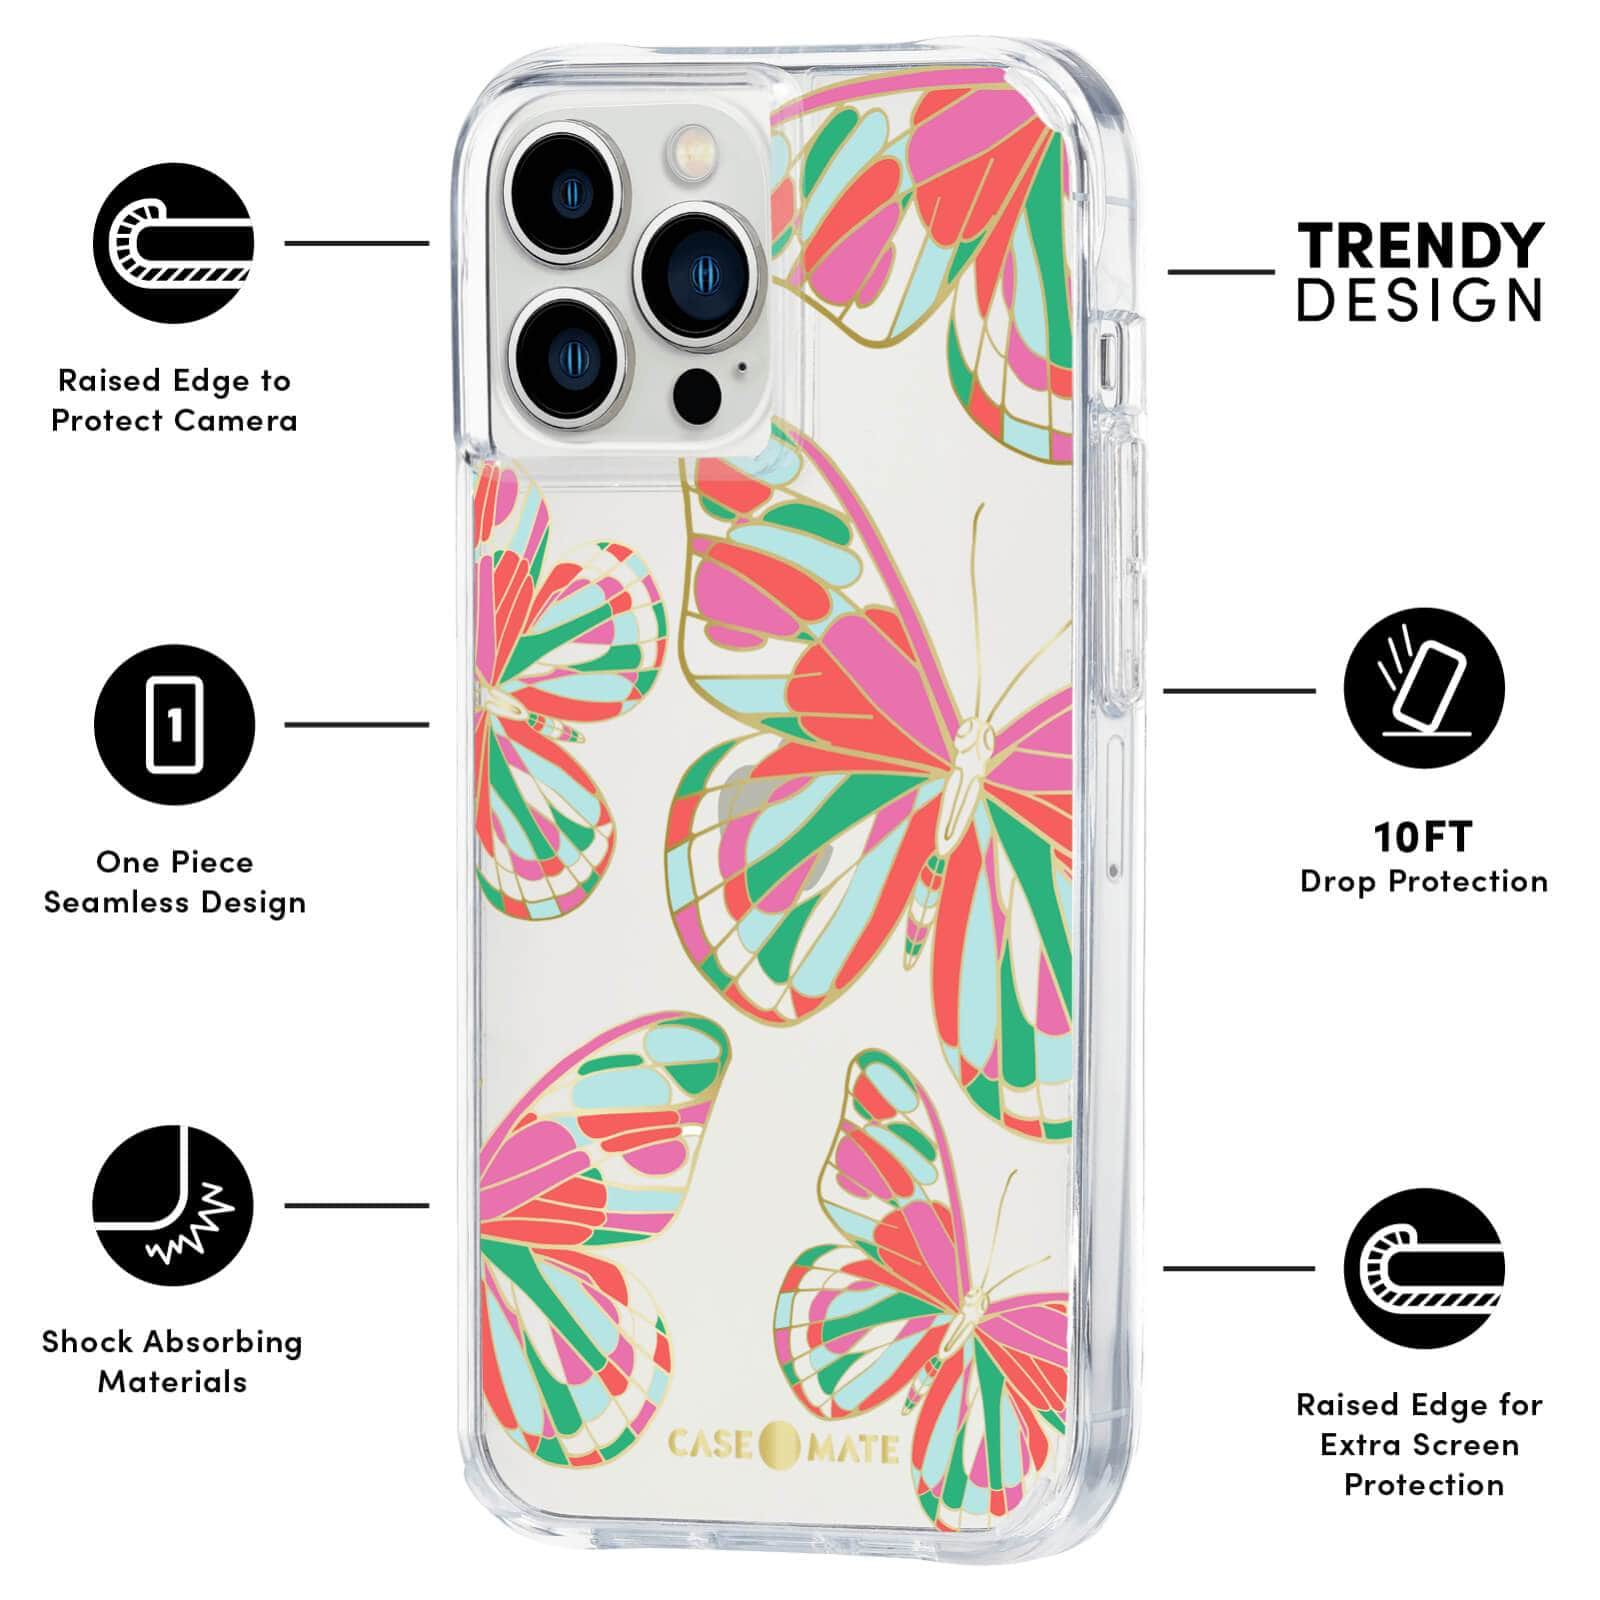 FEATURES: RAISED CAMERA TO PROTECT CAMERA, ONE PIECE SEAMLESS DESIGN, SHOCK ABSORBING MATERIALS, TRENDY DESIGN, 10 FT DROP PROTECTION, RAISED EDGE FOR EXTRA SCREEN PROTECTION. COLOR::BUTTERFLIES